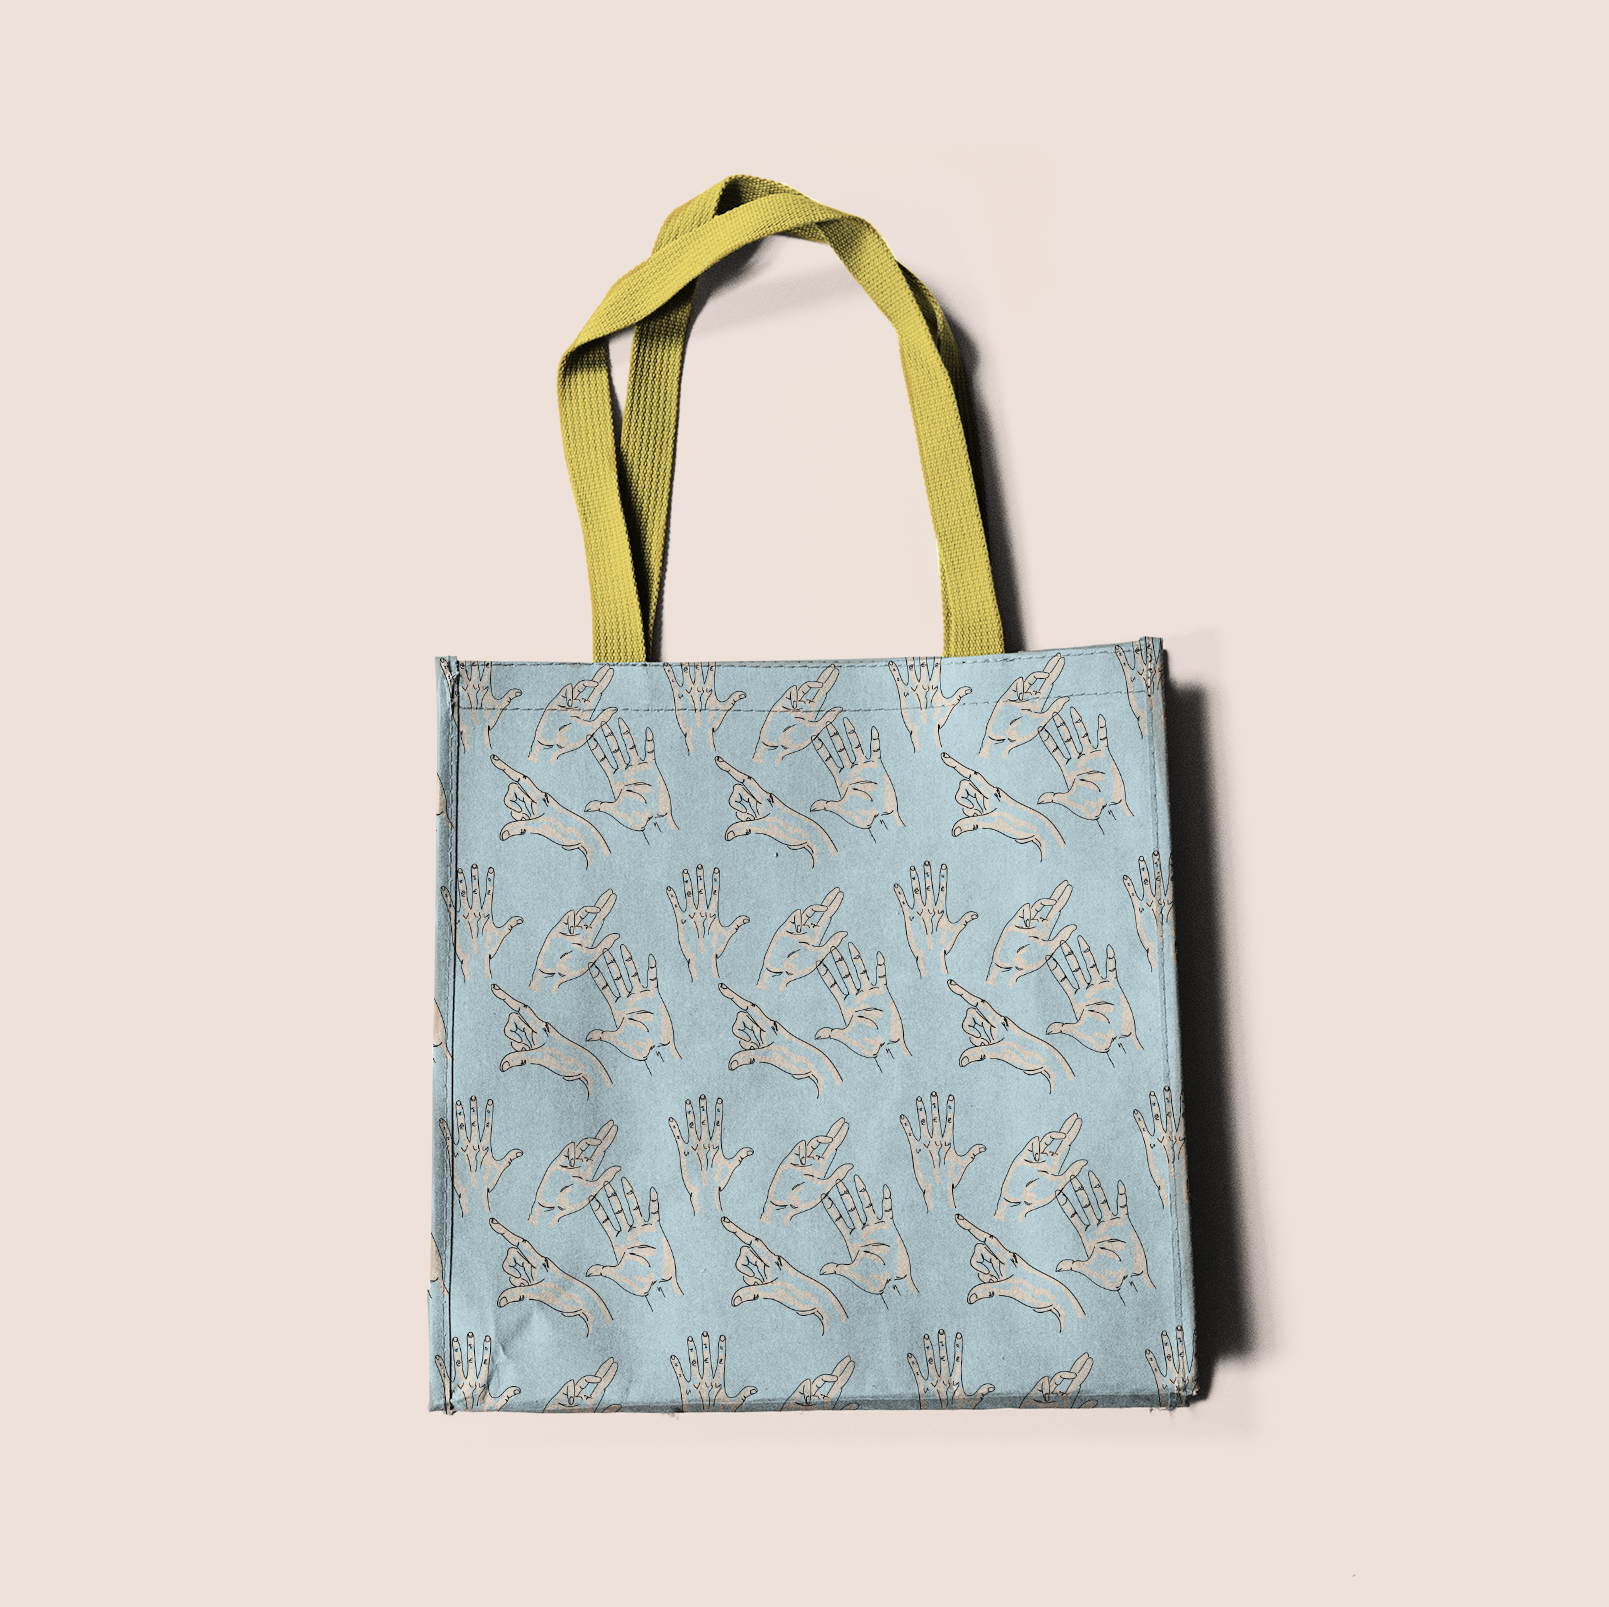 Gestures highlight in blue recycled fabric bags